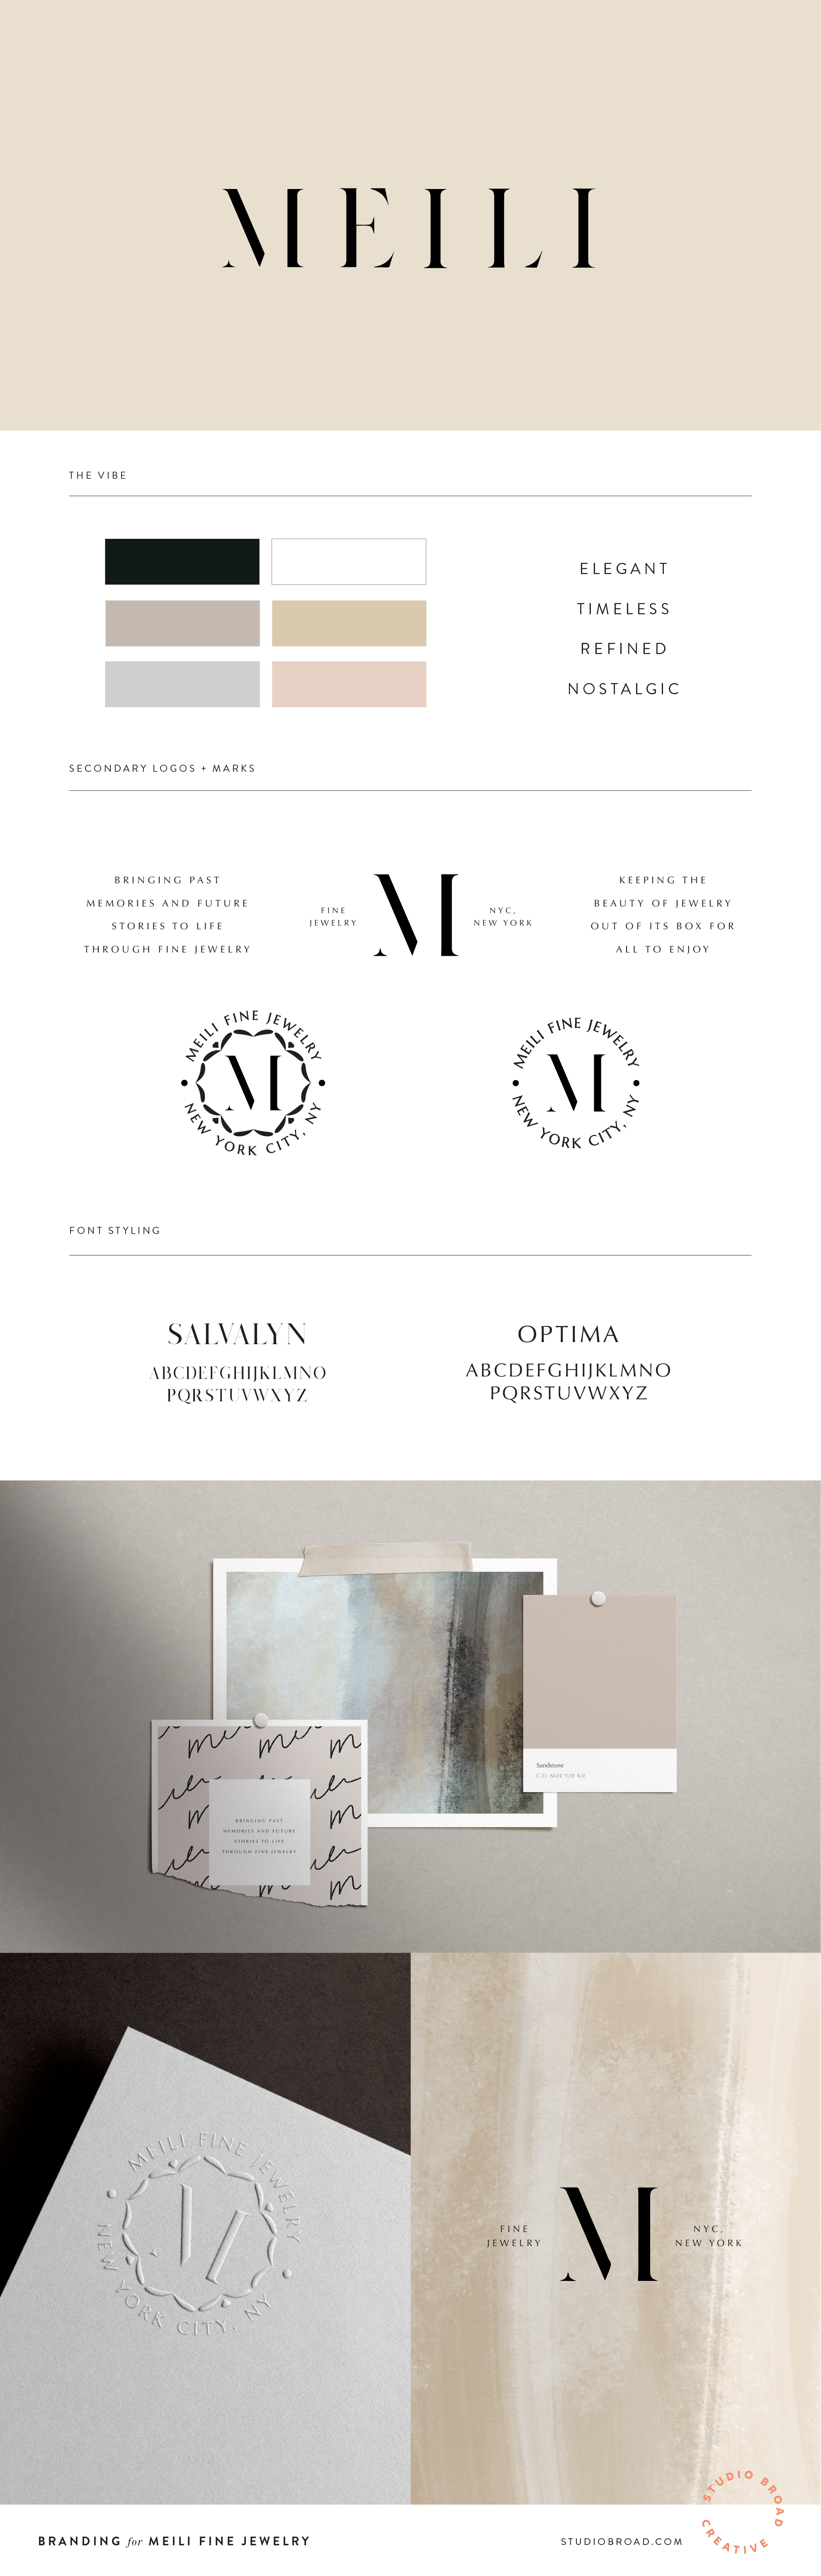 Meili Fine Jewelry branding, logos, and color palette.